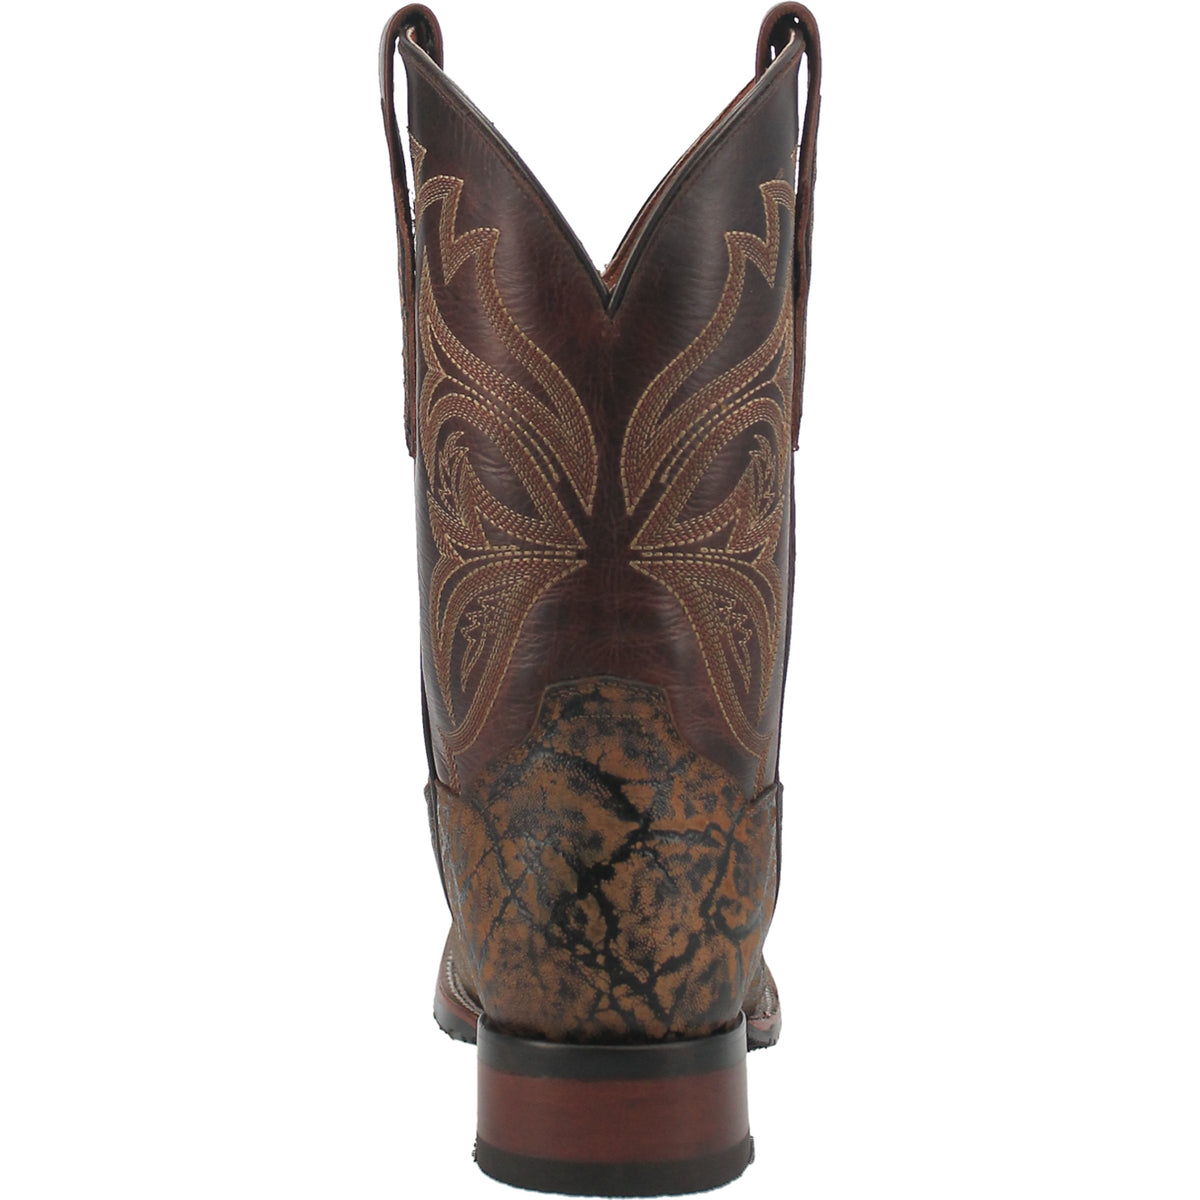 HARVEY LEATHER BOOT Cover